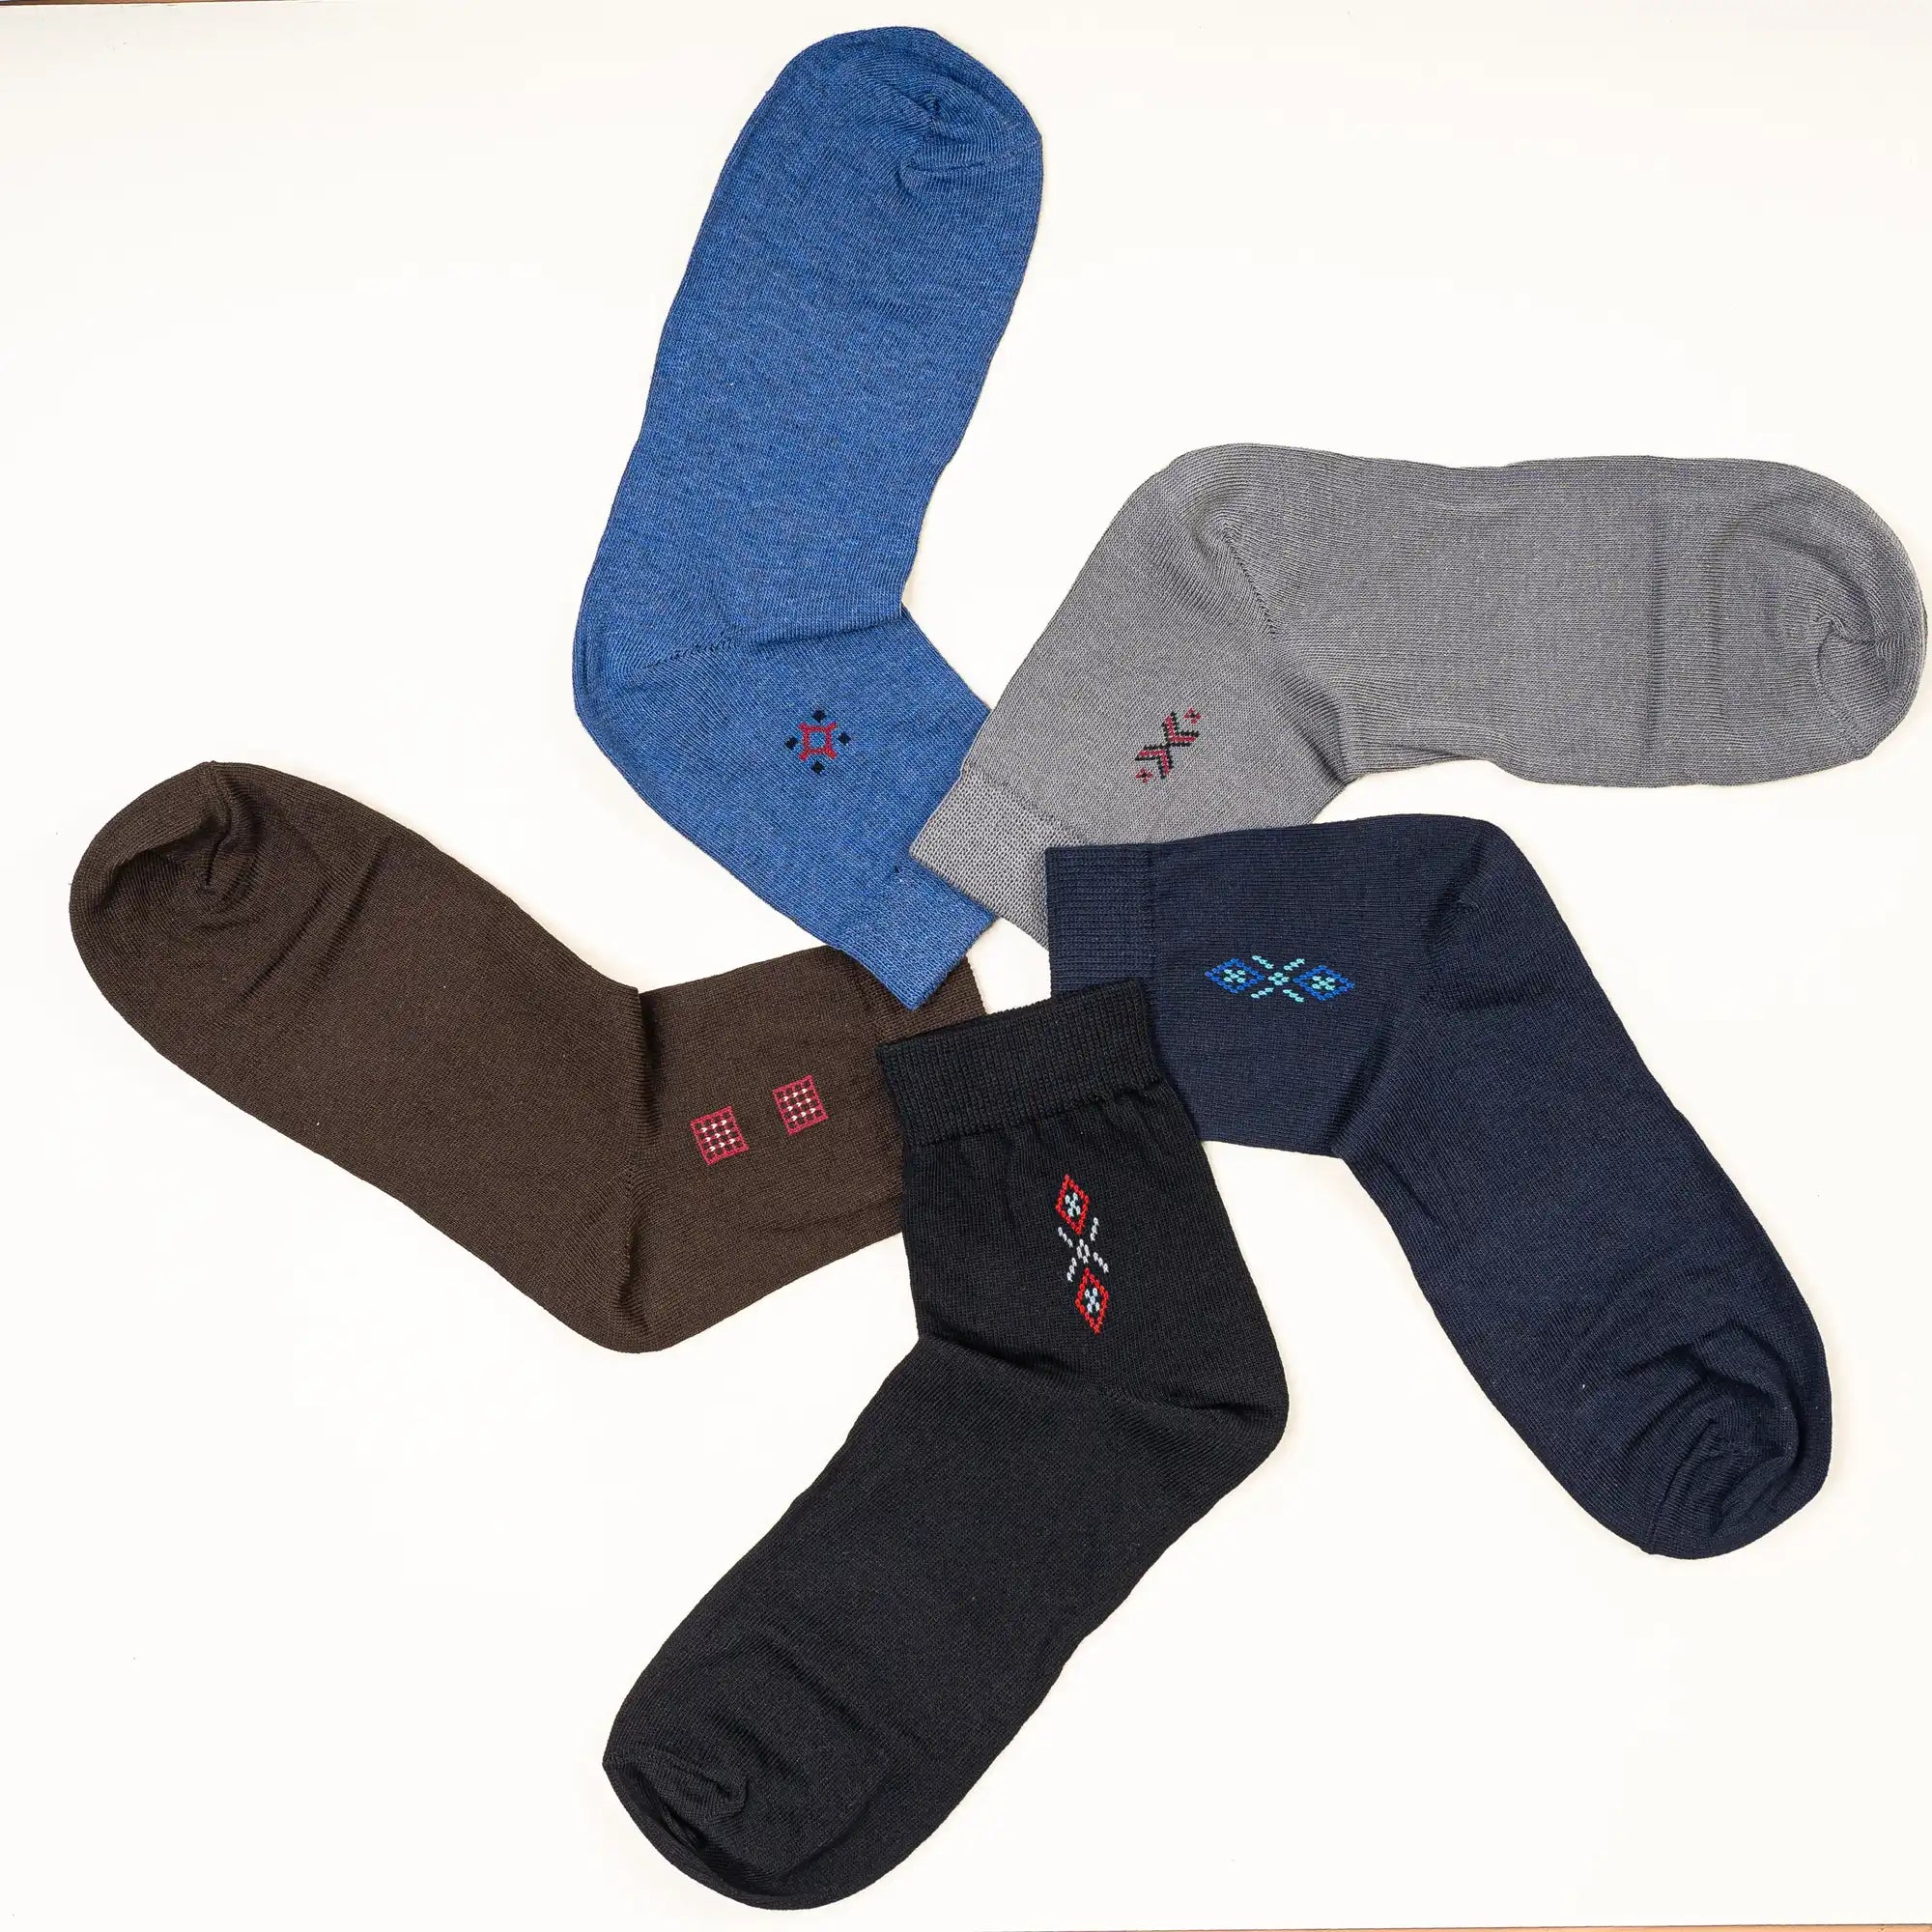 Young Wings Men's Multi Colour Cotton Fabric Solid Ankle Length Socks - Pack of 5, Style no. 2200-M1